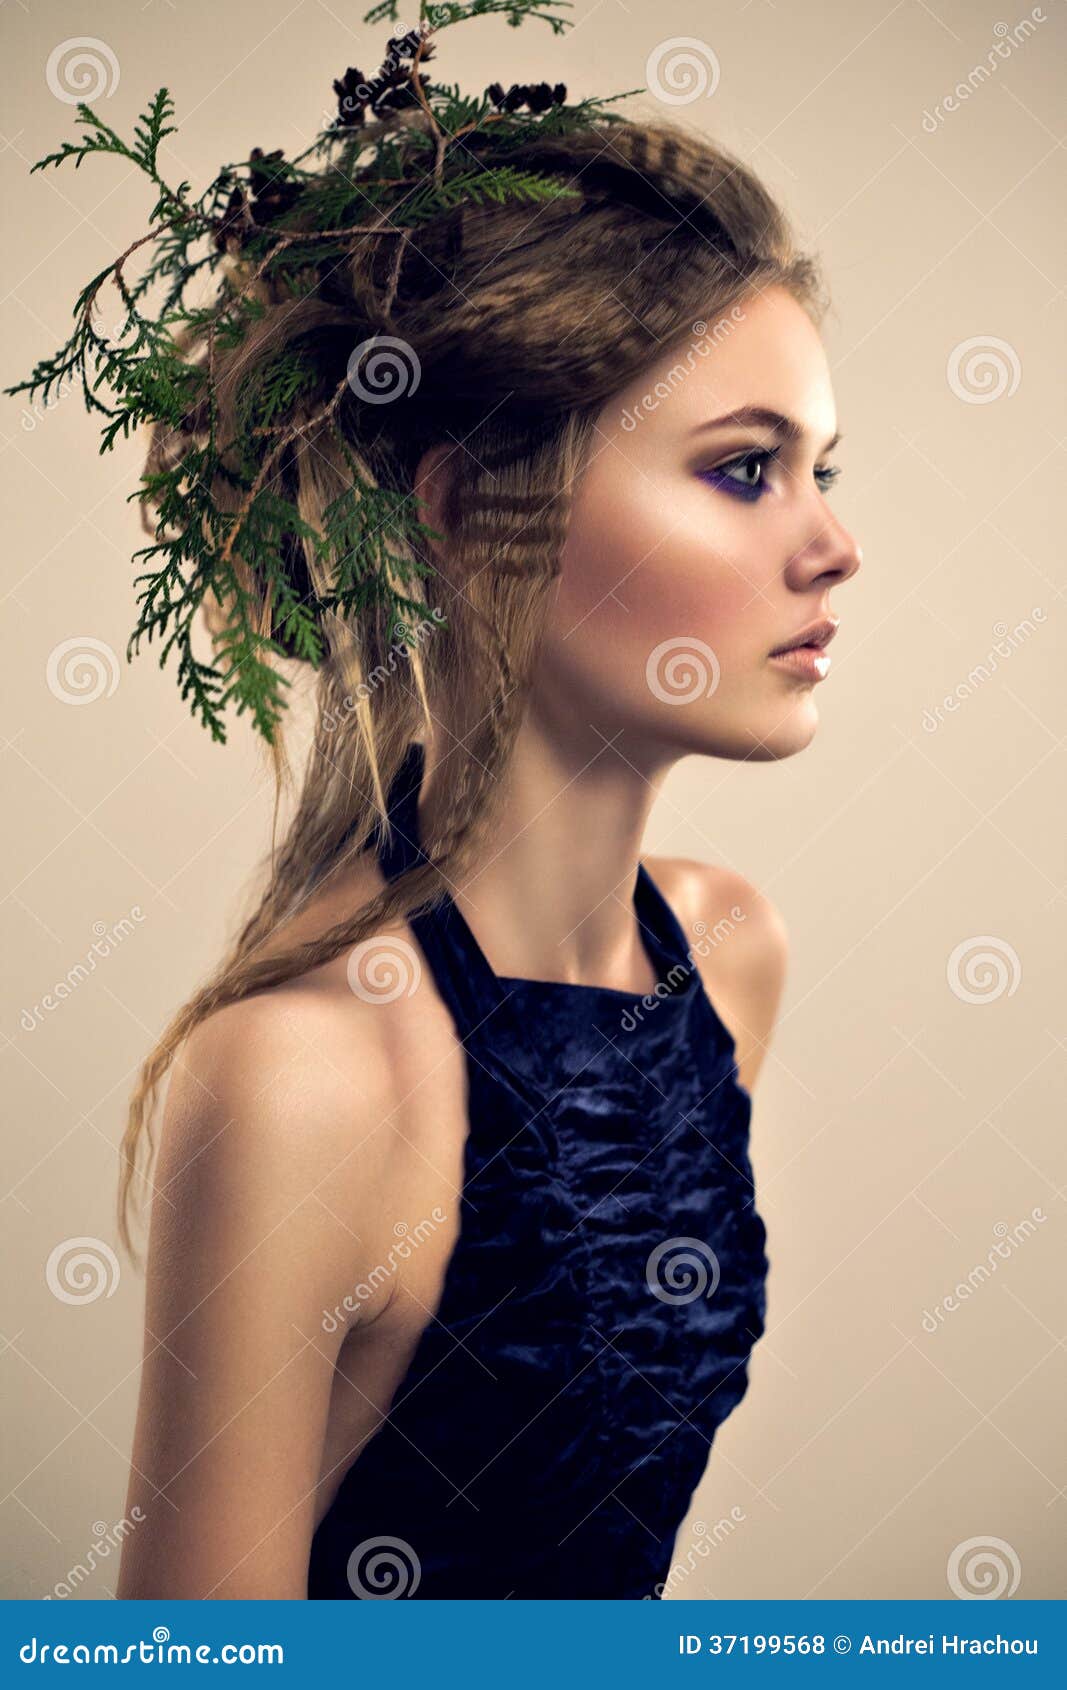 Profile Of Pretty Young Female Royalty Free Stock Photos 